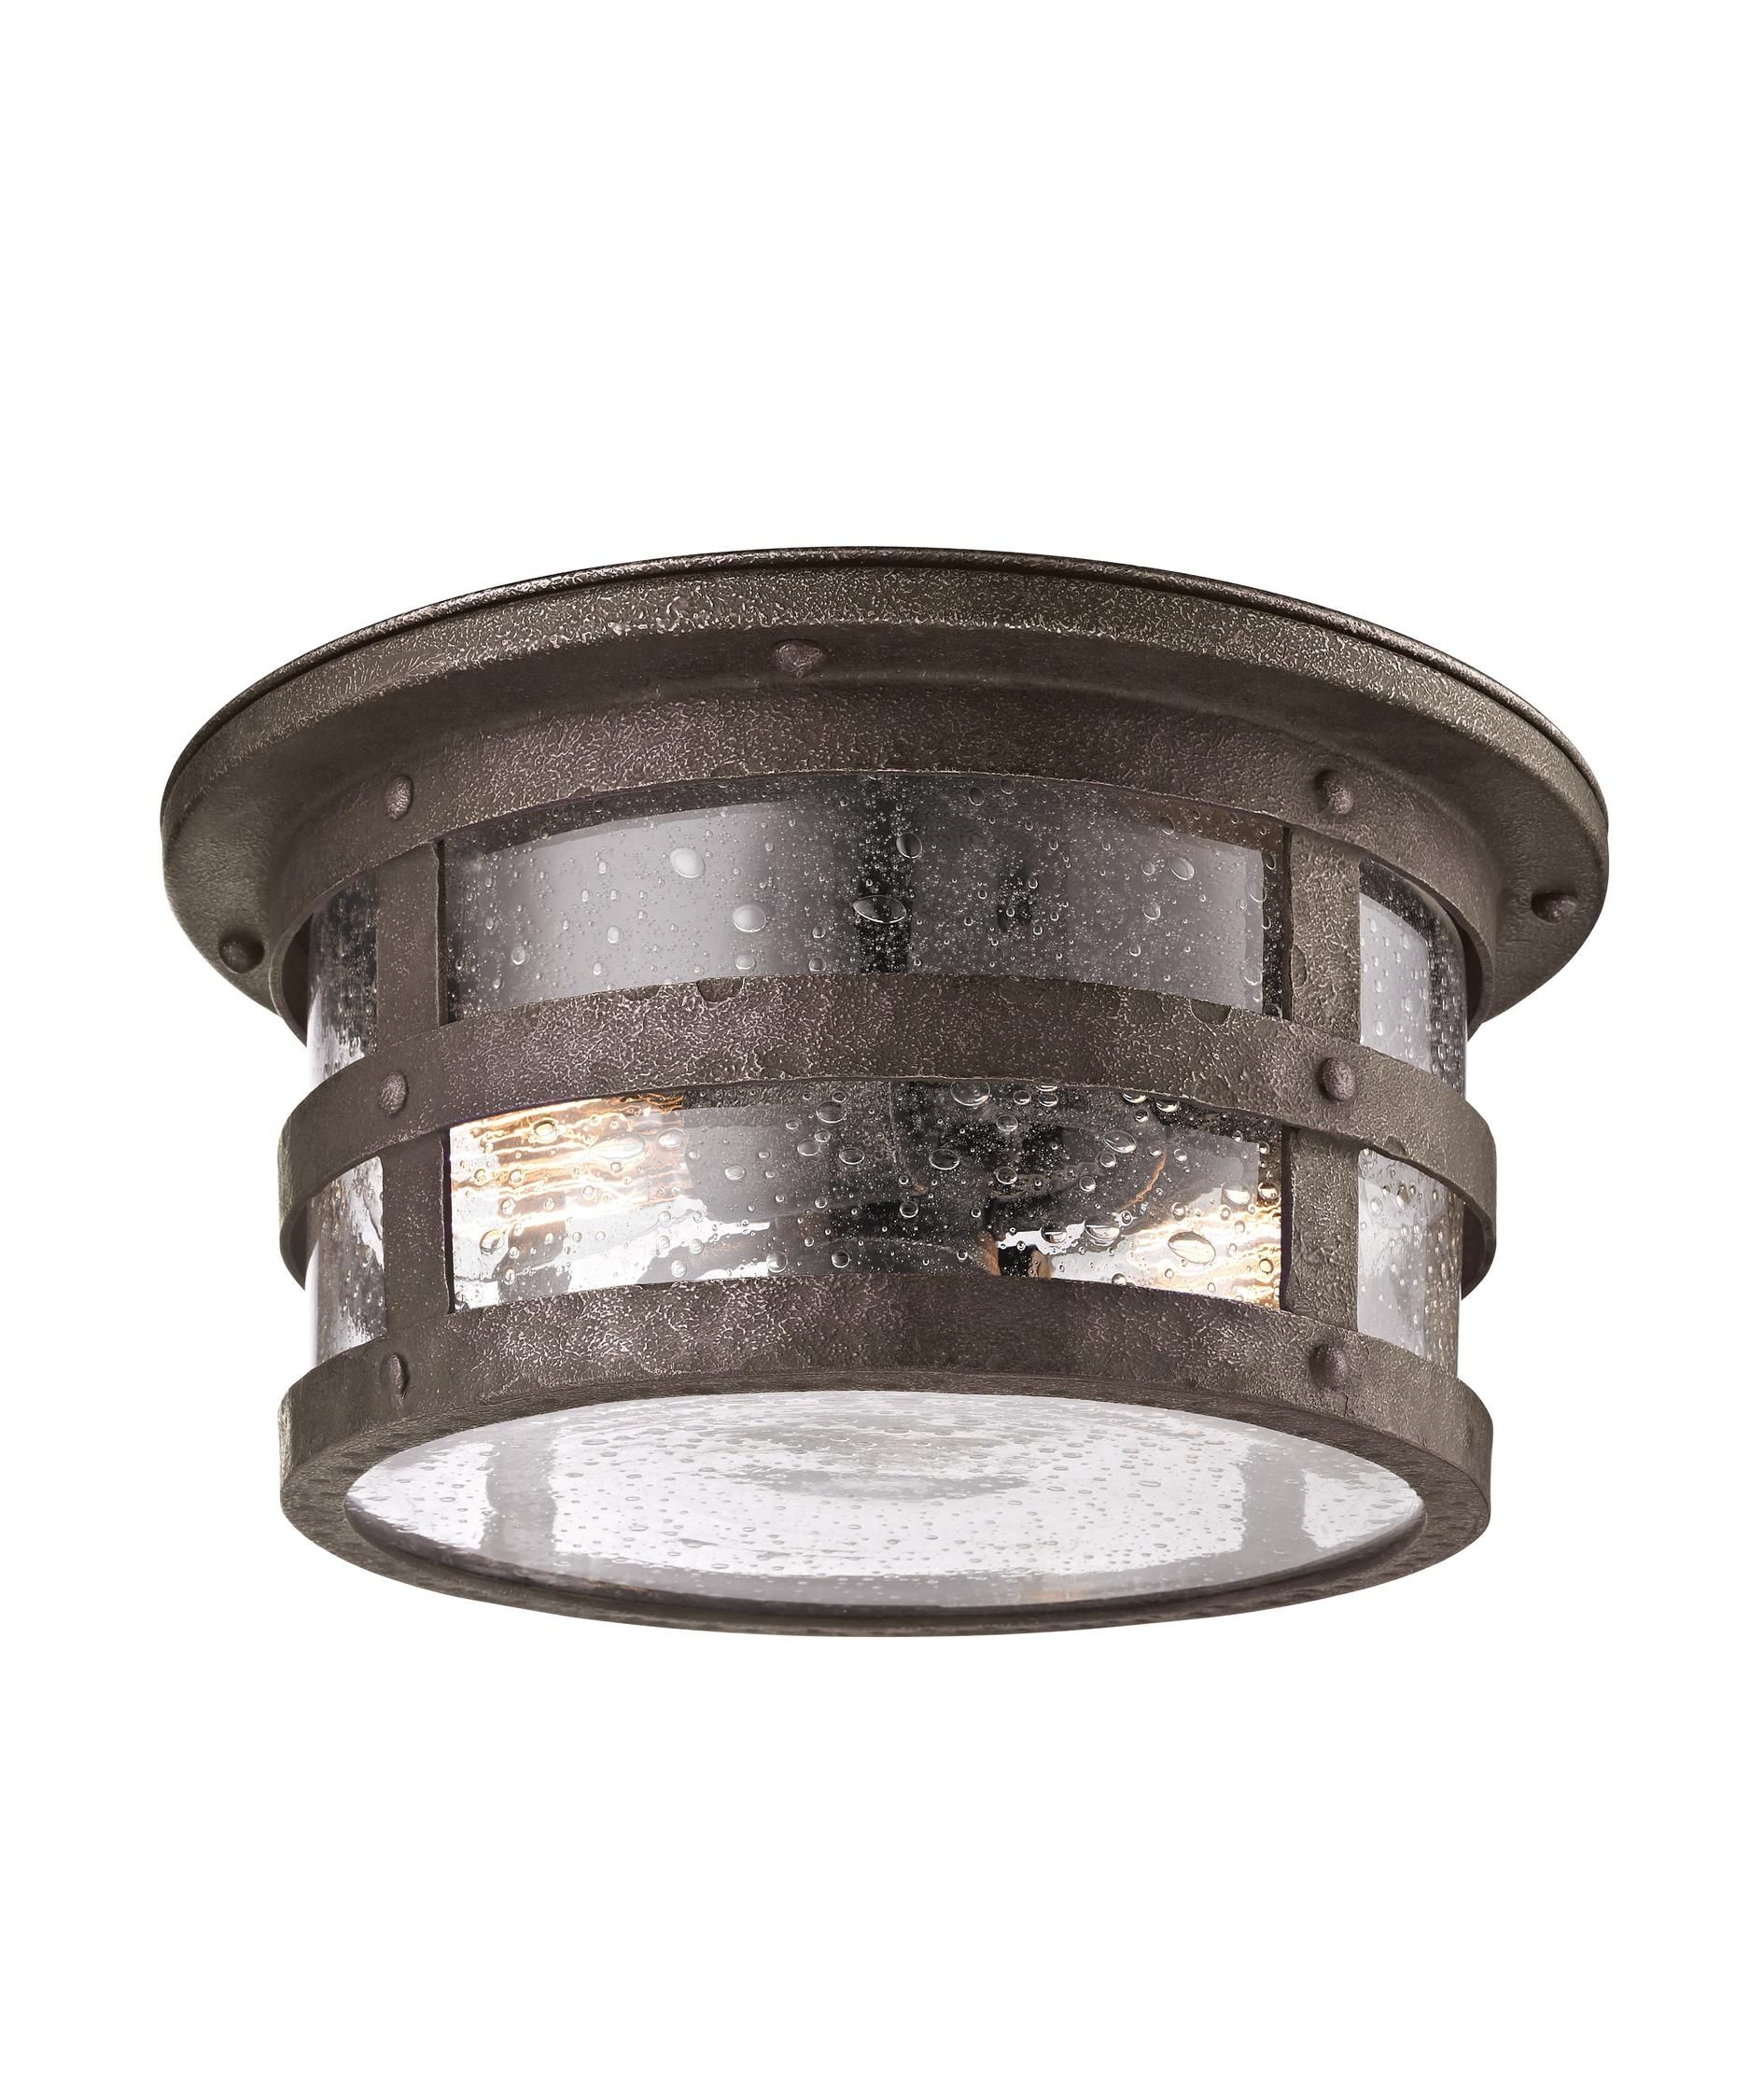 Home Lighting. Nautical Ceiling Light: Troy Lighting Barbosa Inch In Outdoor Ceiling Lights From Australia (Photo 10 of 15)